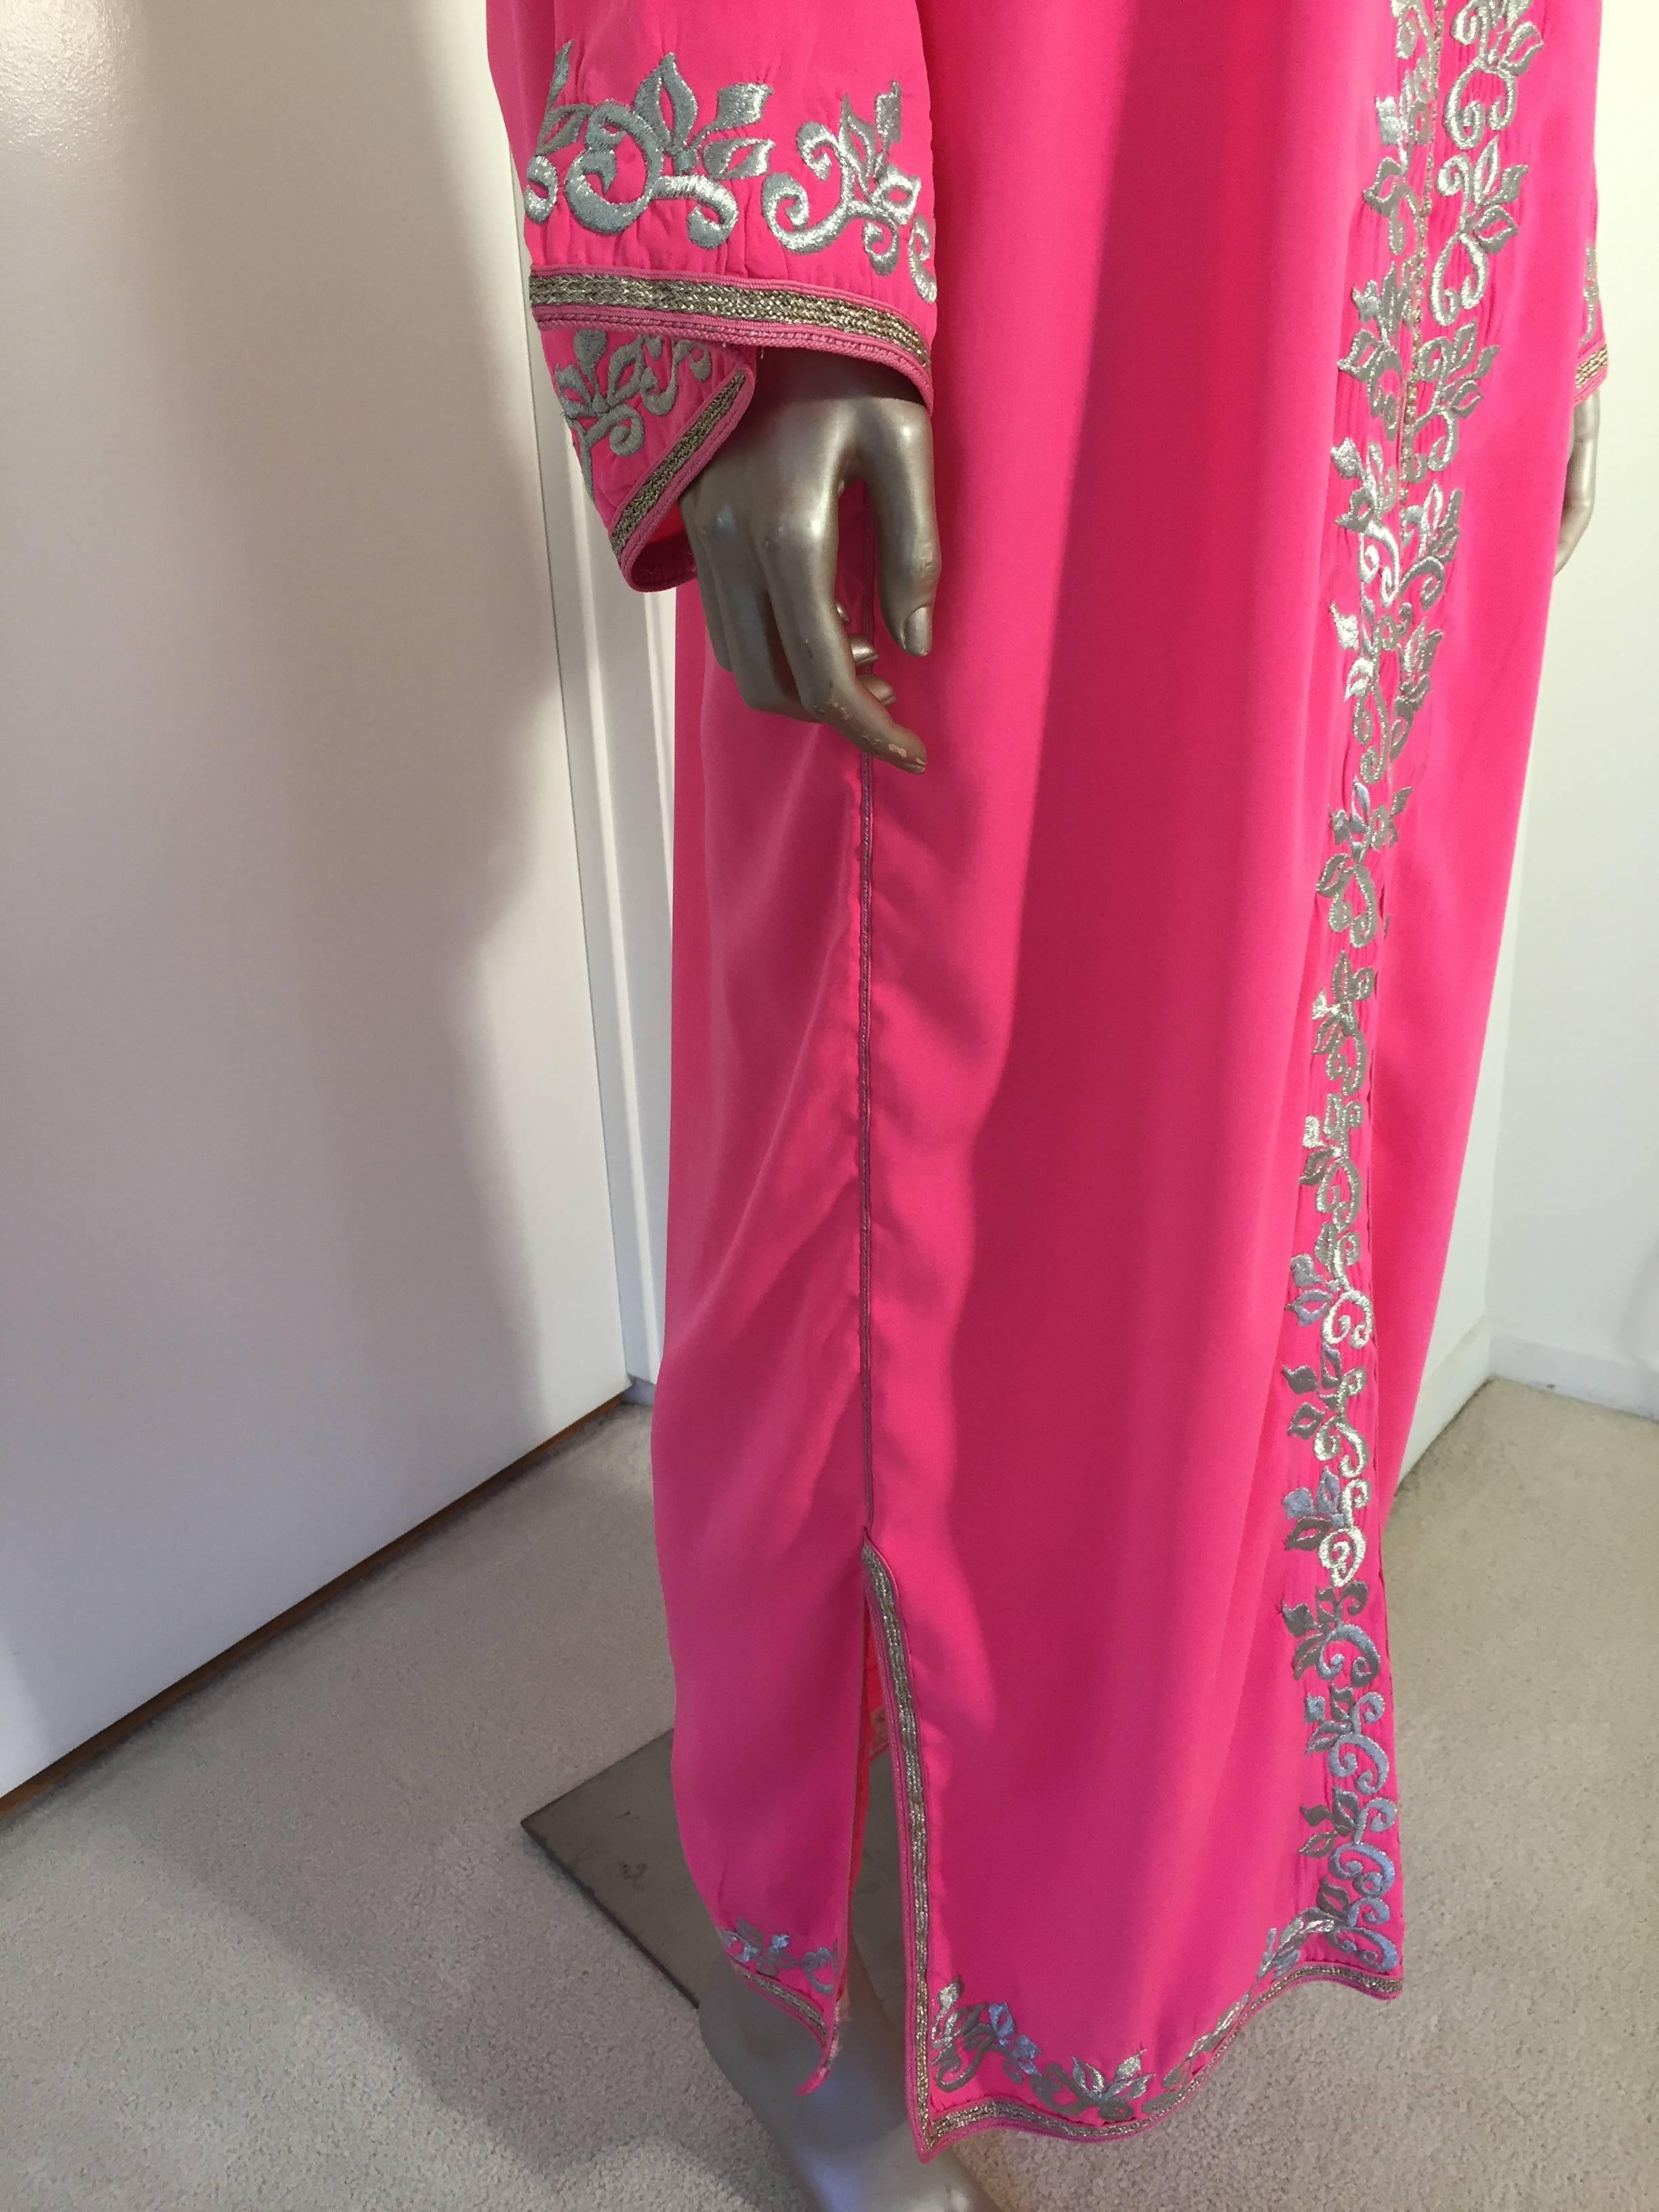 20th Century Moroccan Hot Pink Caftan with Silver Embroideries Maxi Dress Kaftan Size L to XL